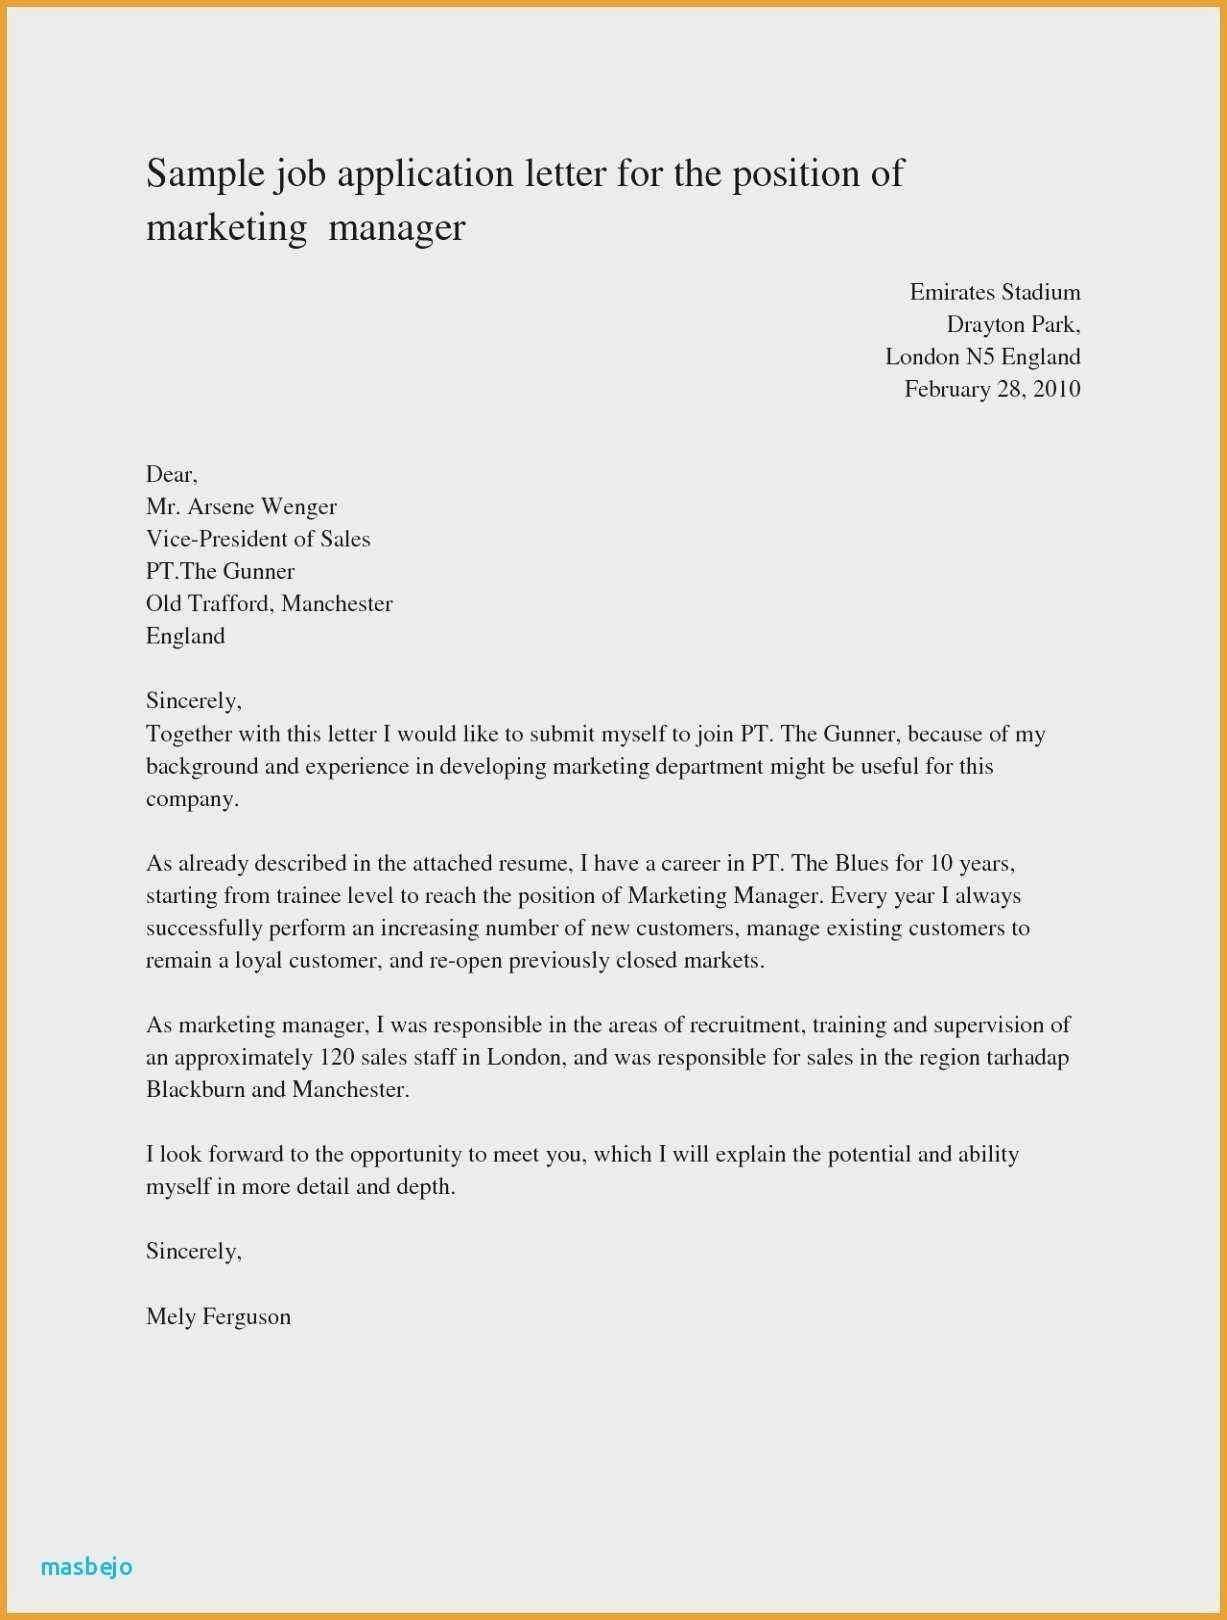 Sample Cover Letter for Job Submitting Resume A Sample Application Letter for A Job – Google Search Job Cover …